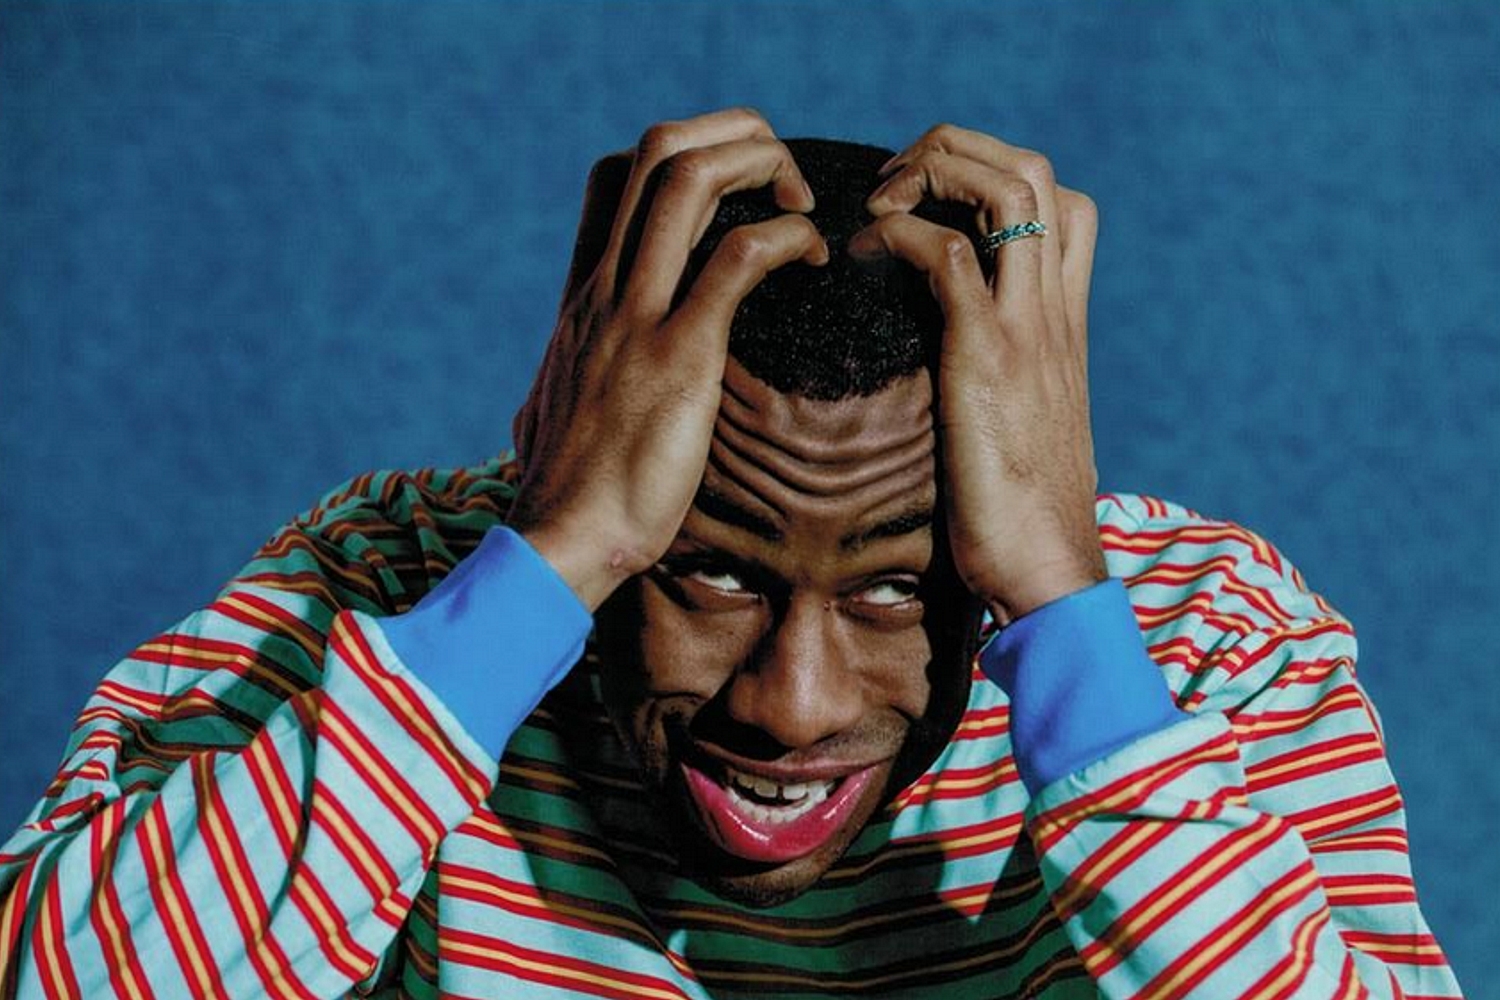 Tyler, the Creator hints that OFWGKTA might be over